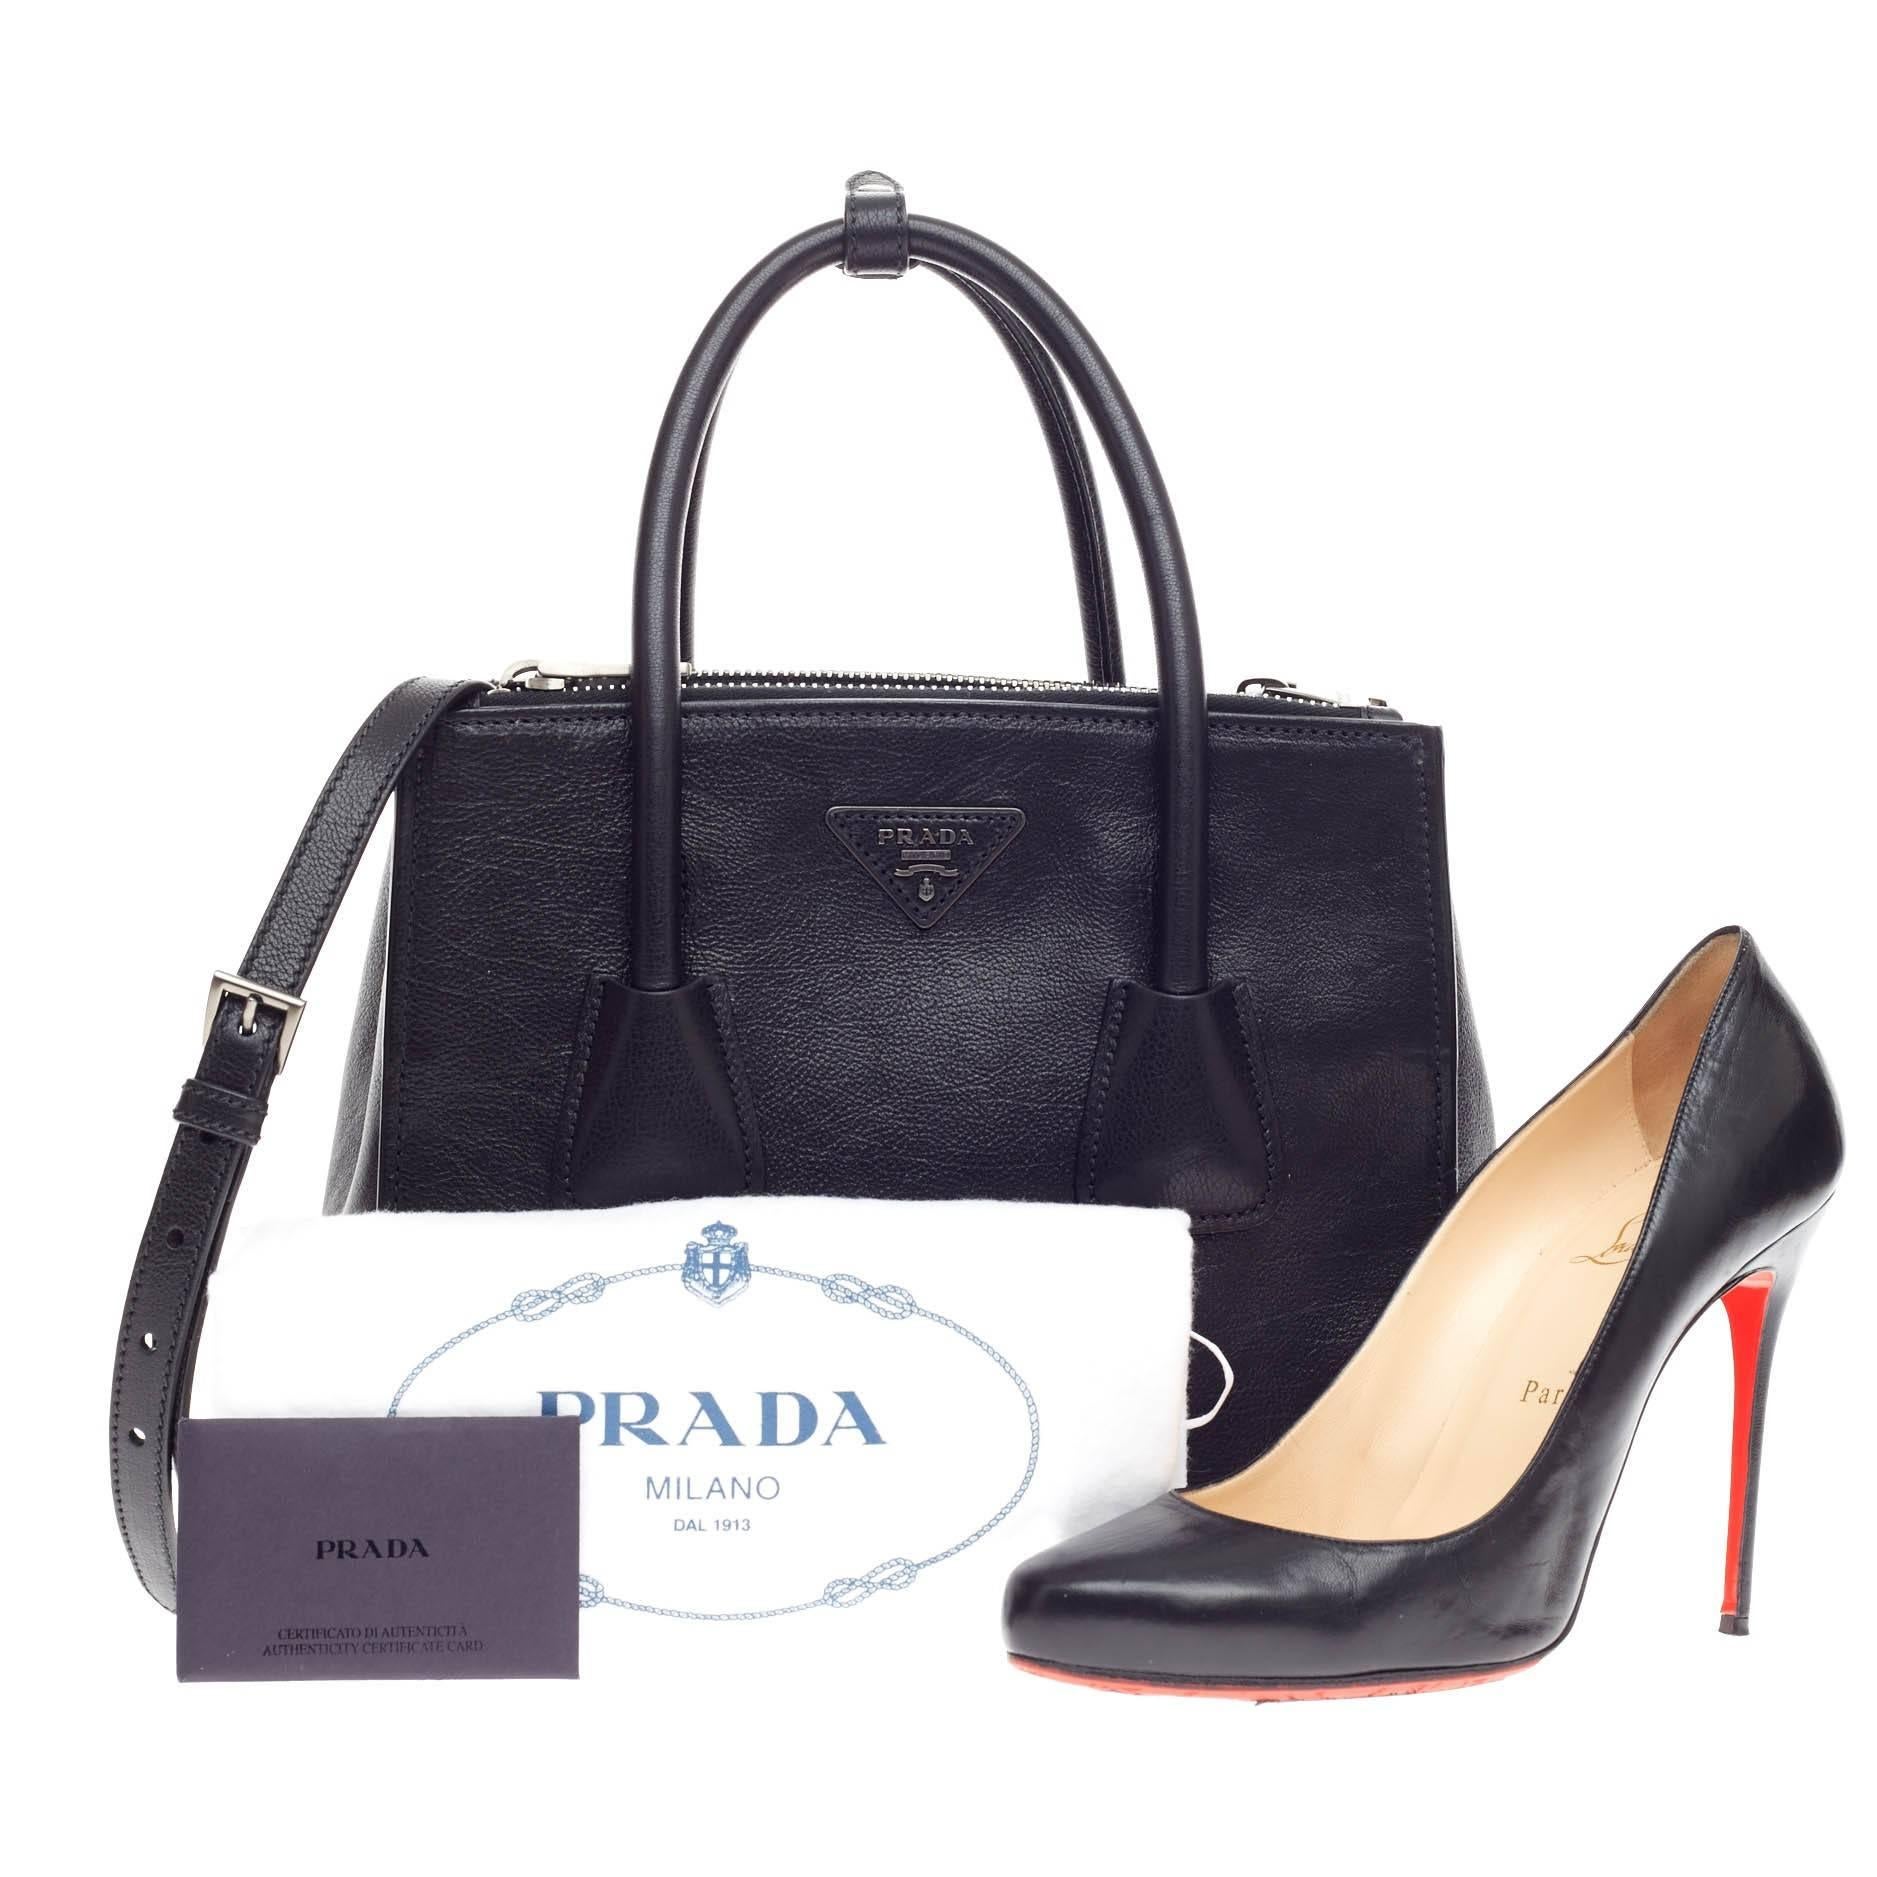 This authentic Prada Twin Pocket Tote Glace Calf Small showcases a sophisticated silhouette balancing modern luxury and style perfect for the on-the-go woman. Crafted from glossy glace calf leather in sleek nero black, this petite, boxy tote